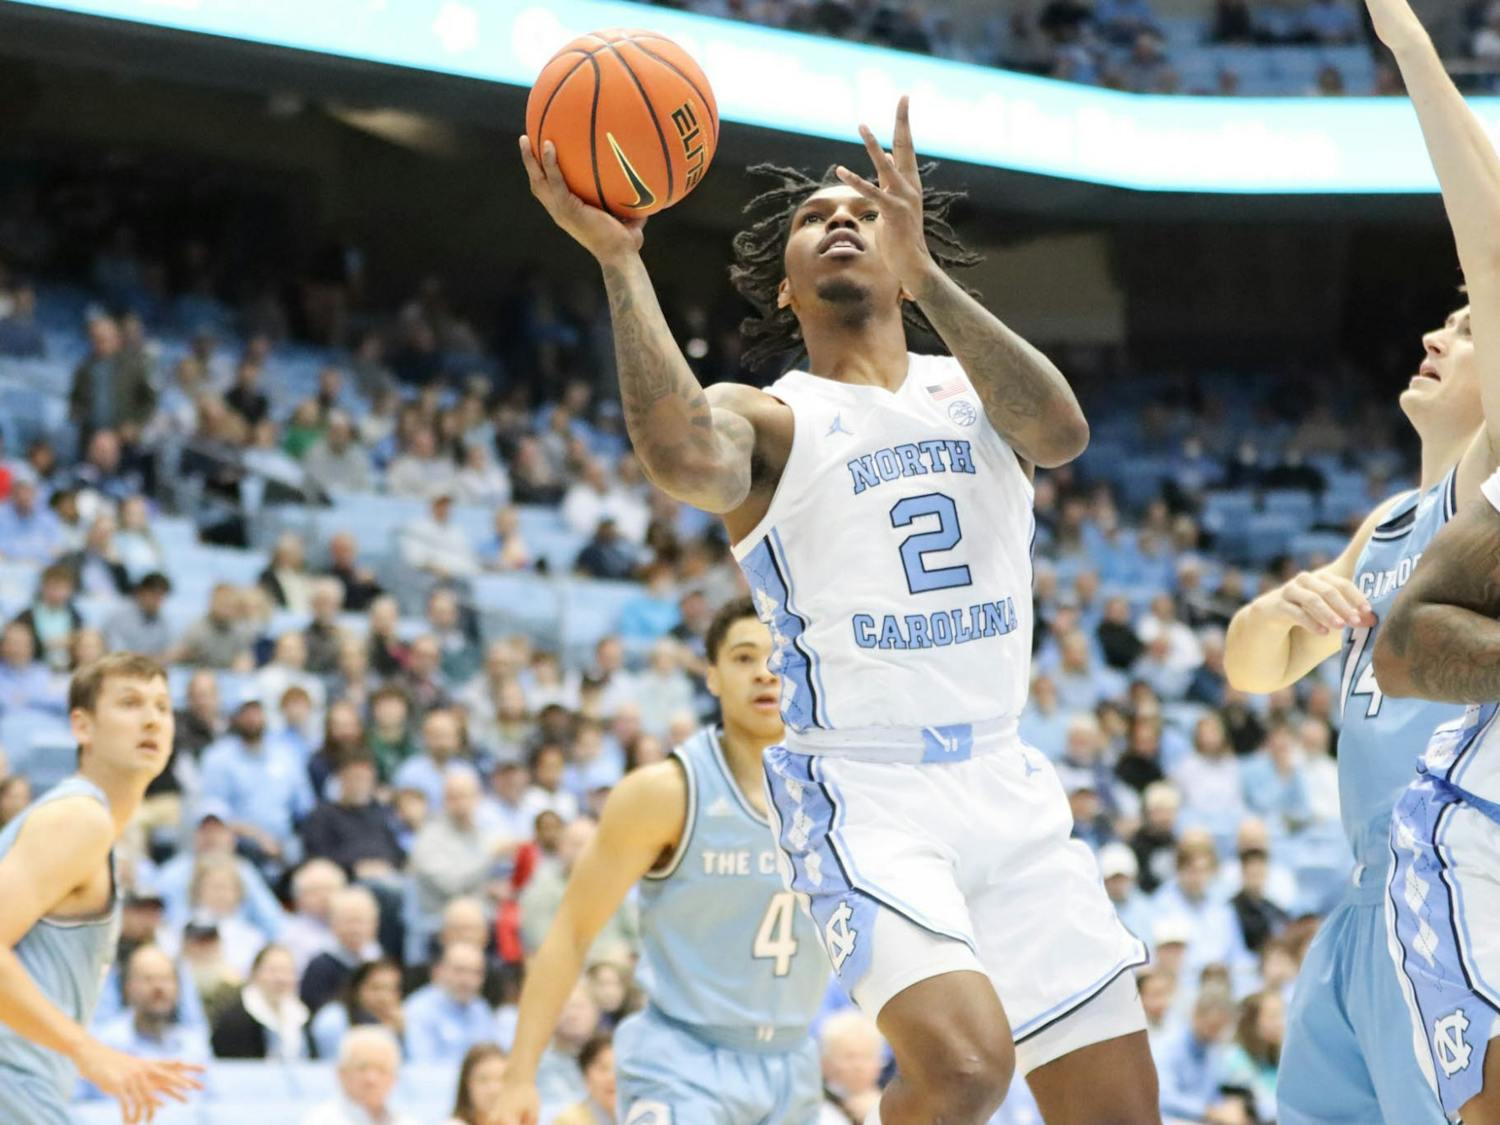 UNC junior guard Caleb Love (2) shoots a layup men's basketball game against The Citadel at the Dean Smith Center on Tuesday, Dec. 13, 2022. UNC beat The Citadel 100-67.